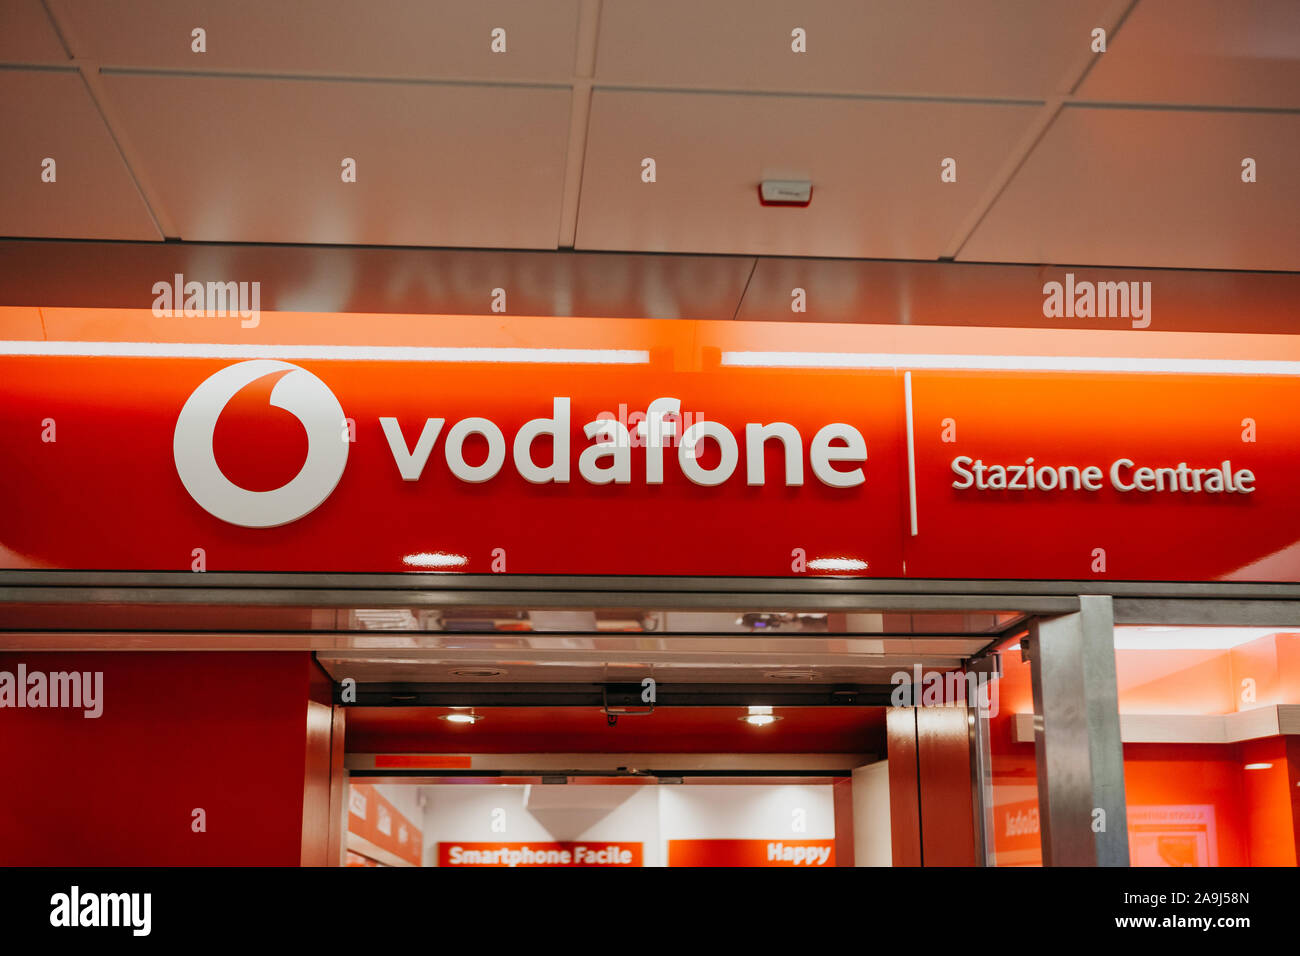 Italy, Milan, July 12, 2019: A sign Vodafon at the entrance to a retail chain store in Italy. Stock Photo